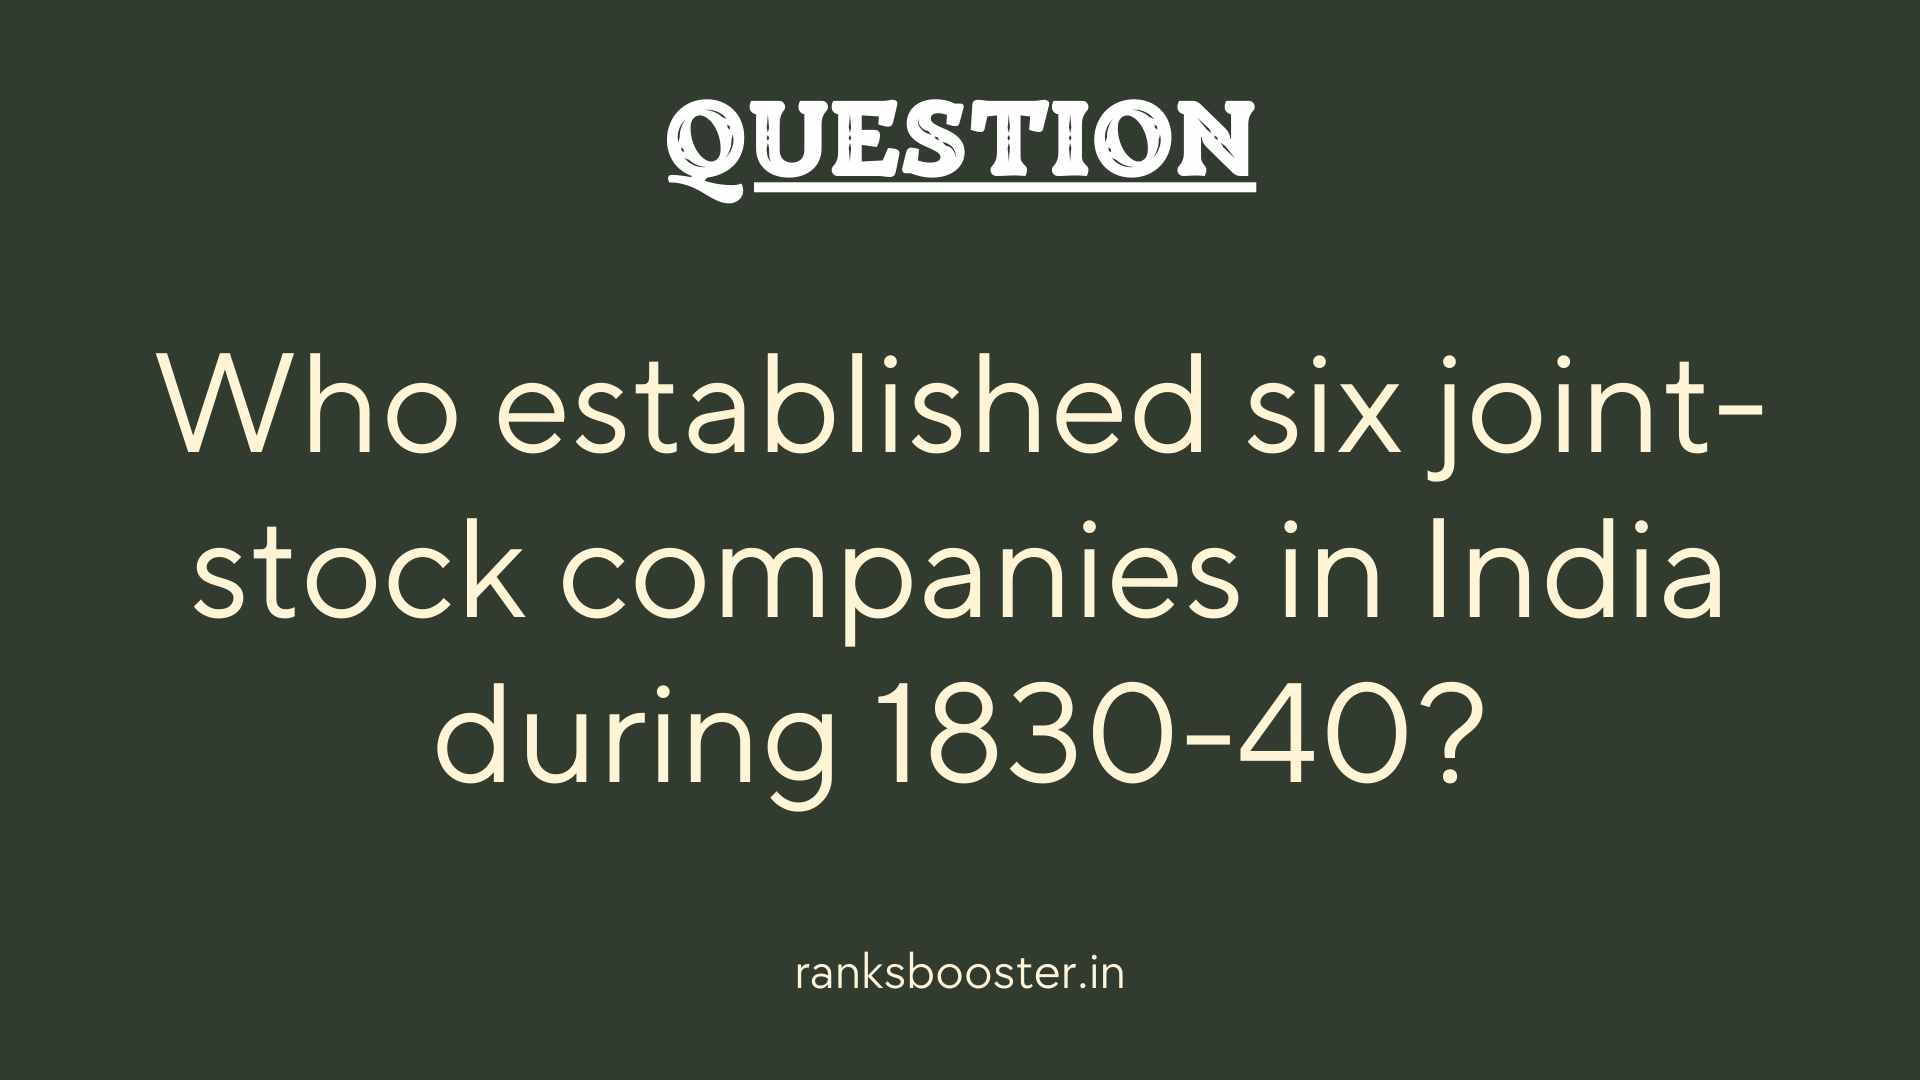 Question: Who established six joint-stock companies in India during 1830-40?